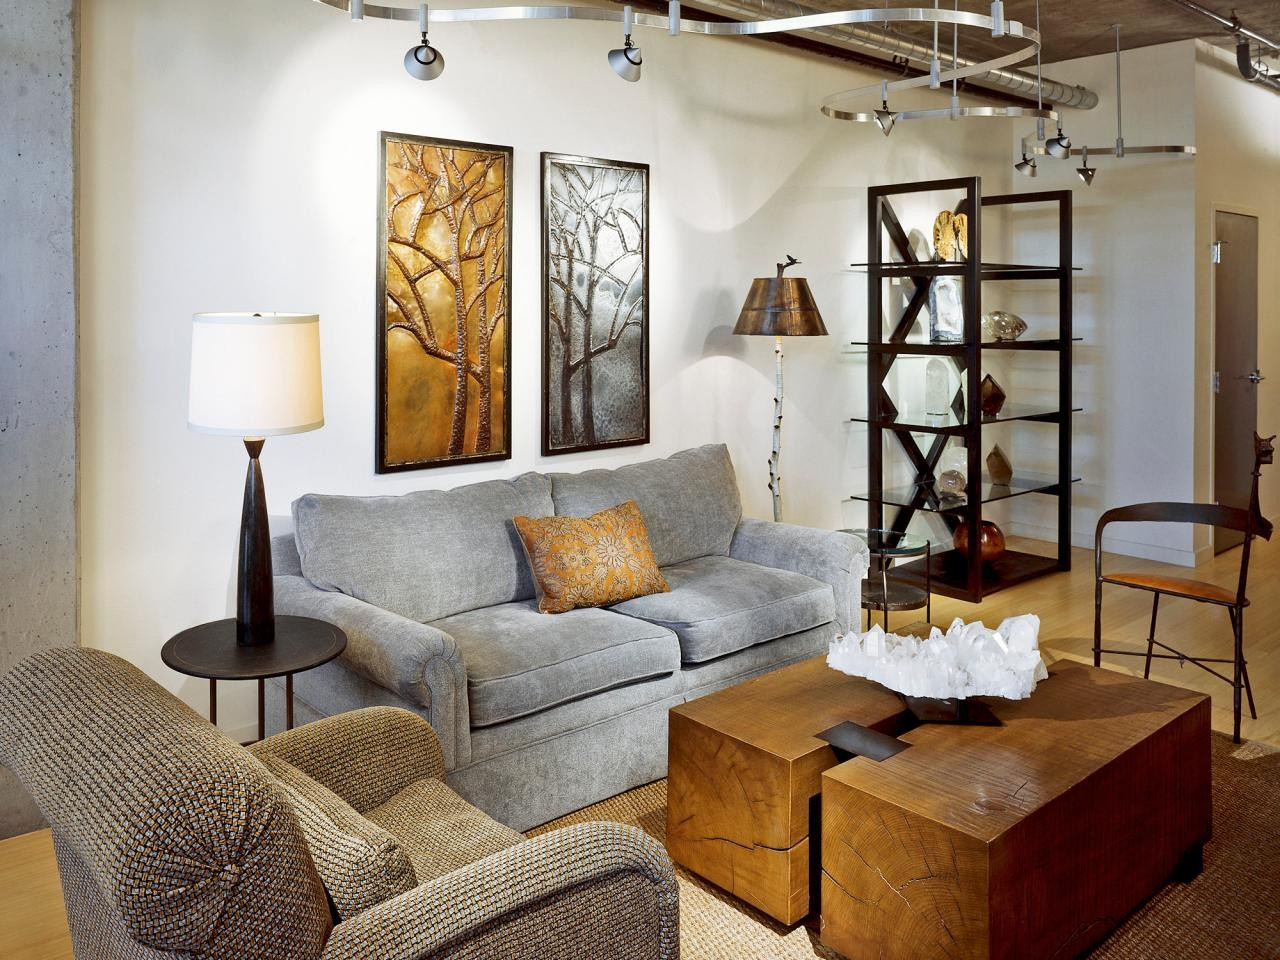 Living Room Floor Lamps
 How to Decorate your Living Room with Floor and Table Lamps